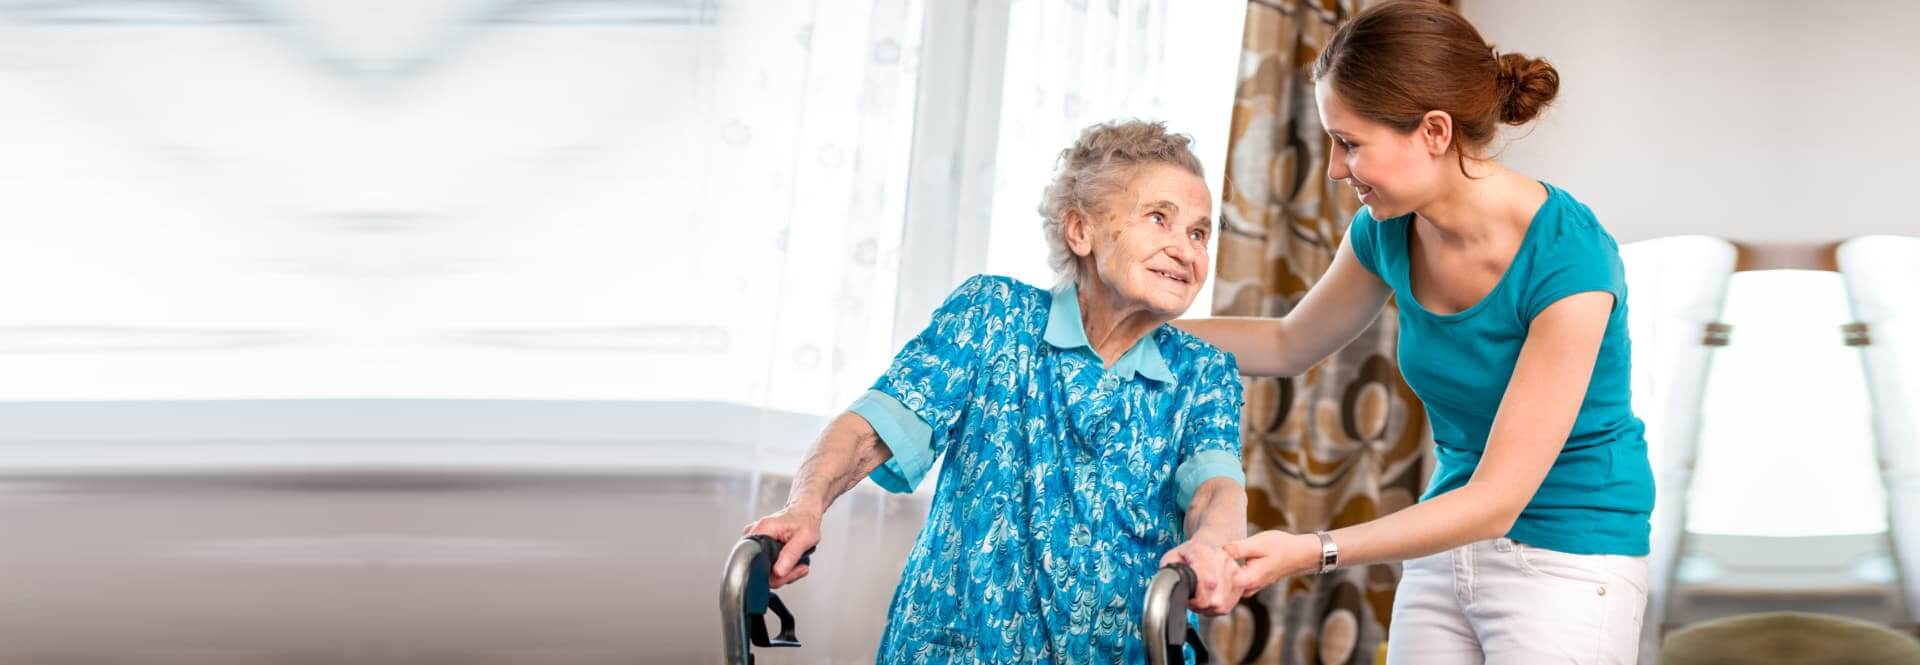 smiling caregiver talking to her patient